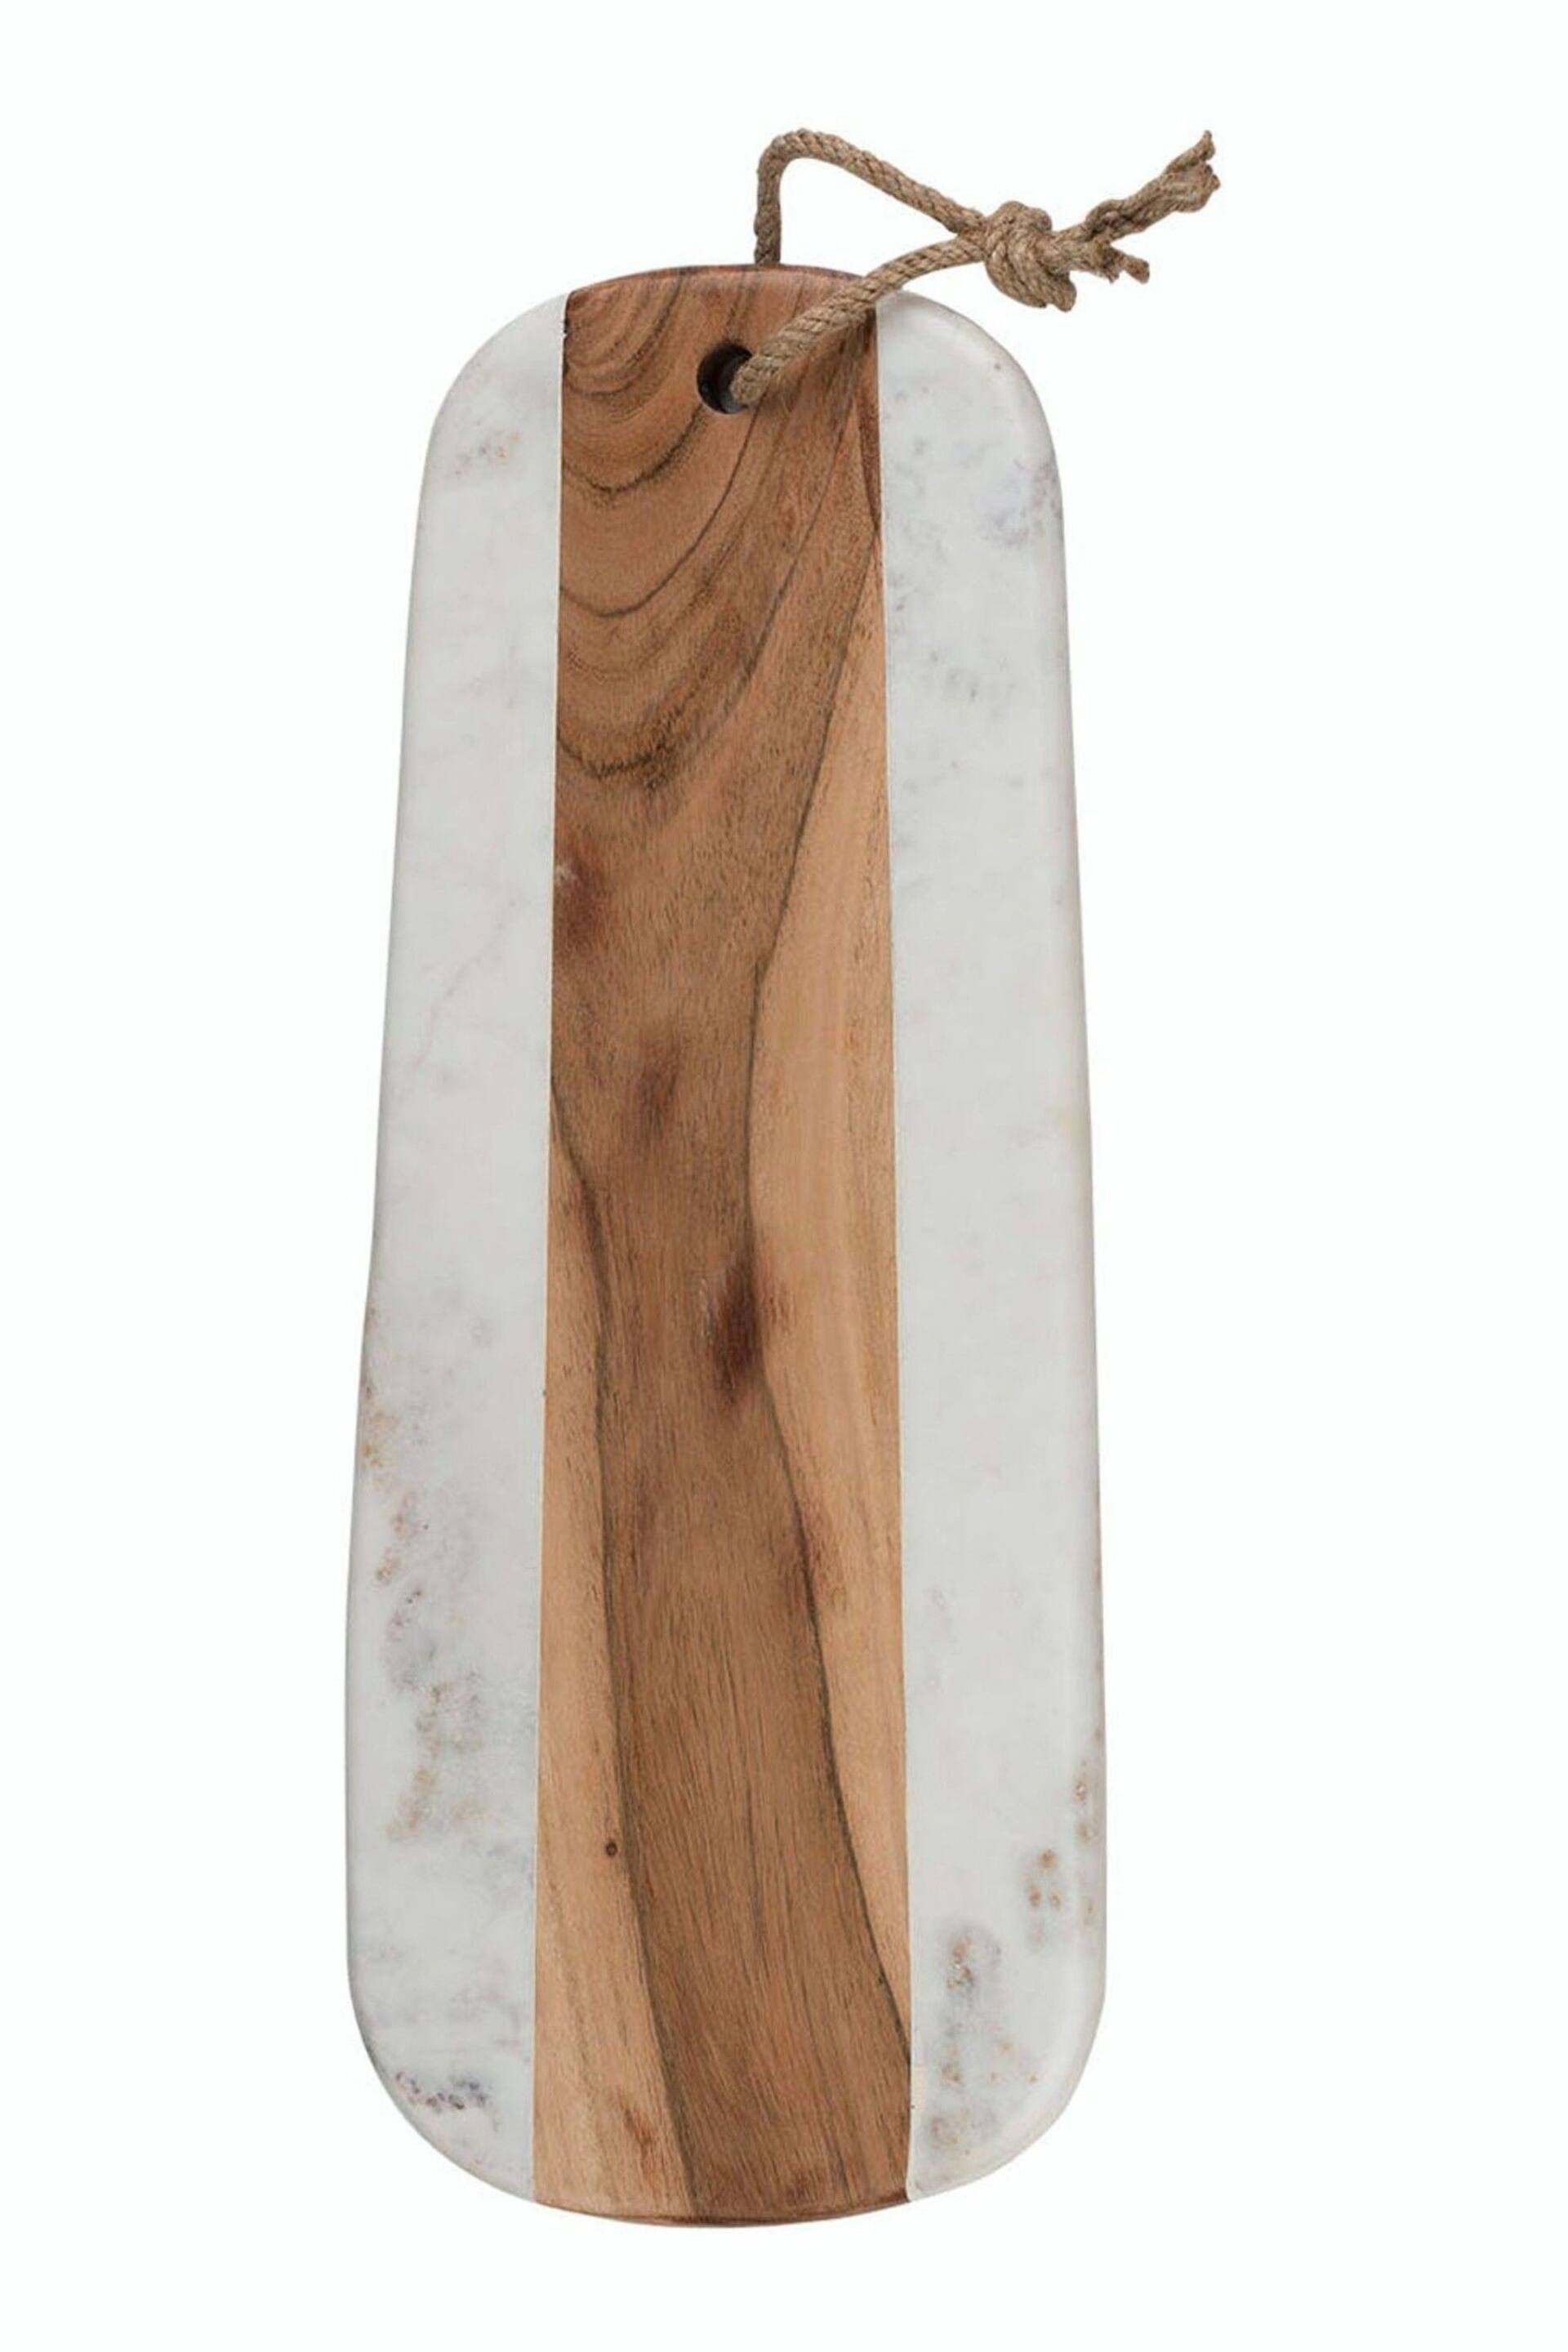 Artesa Assorted Marble and Acacia Wood Serving Board - Image 1 of 1